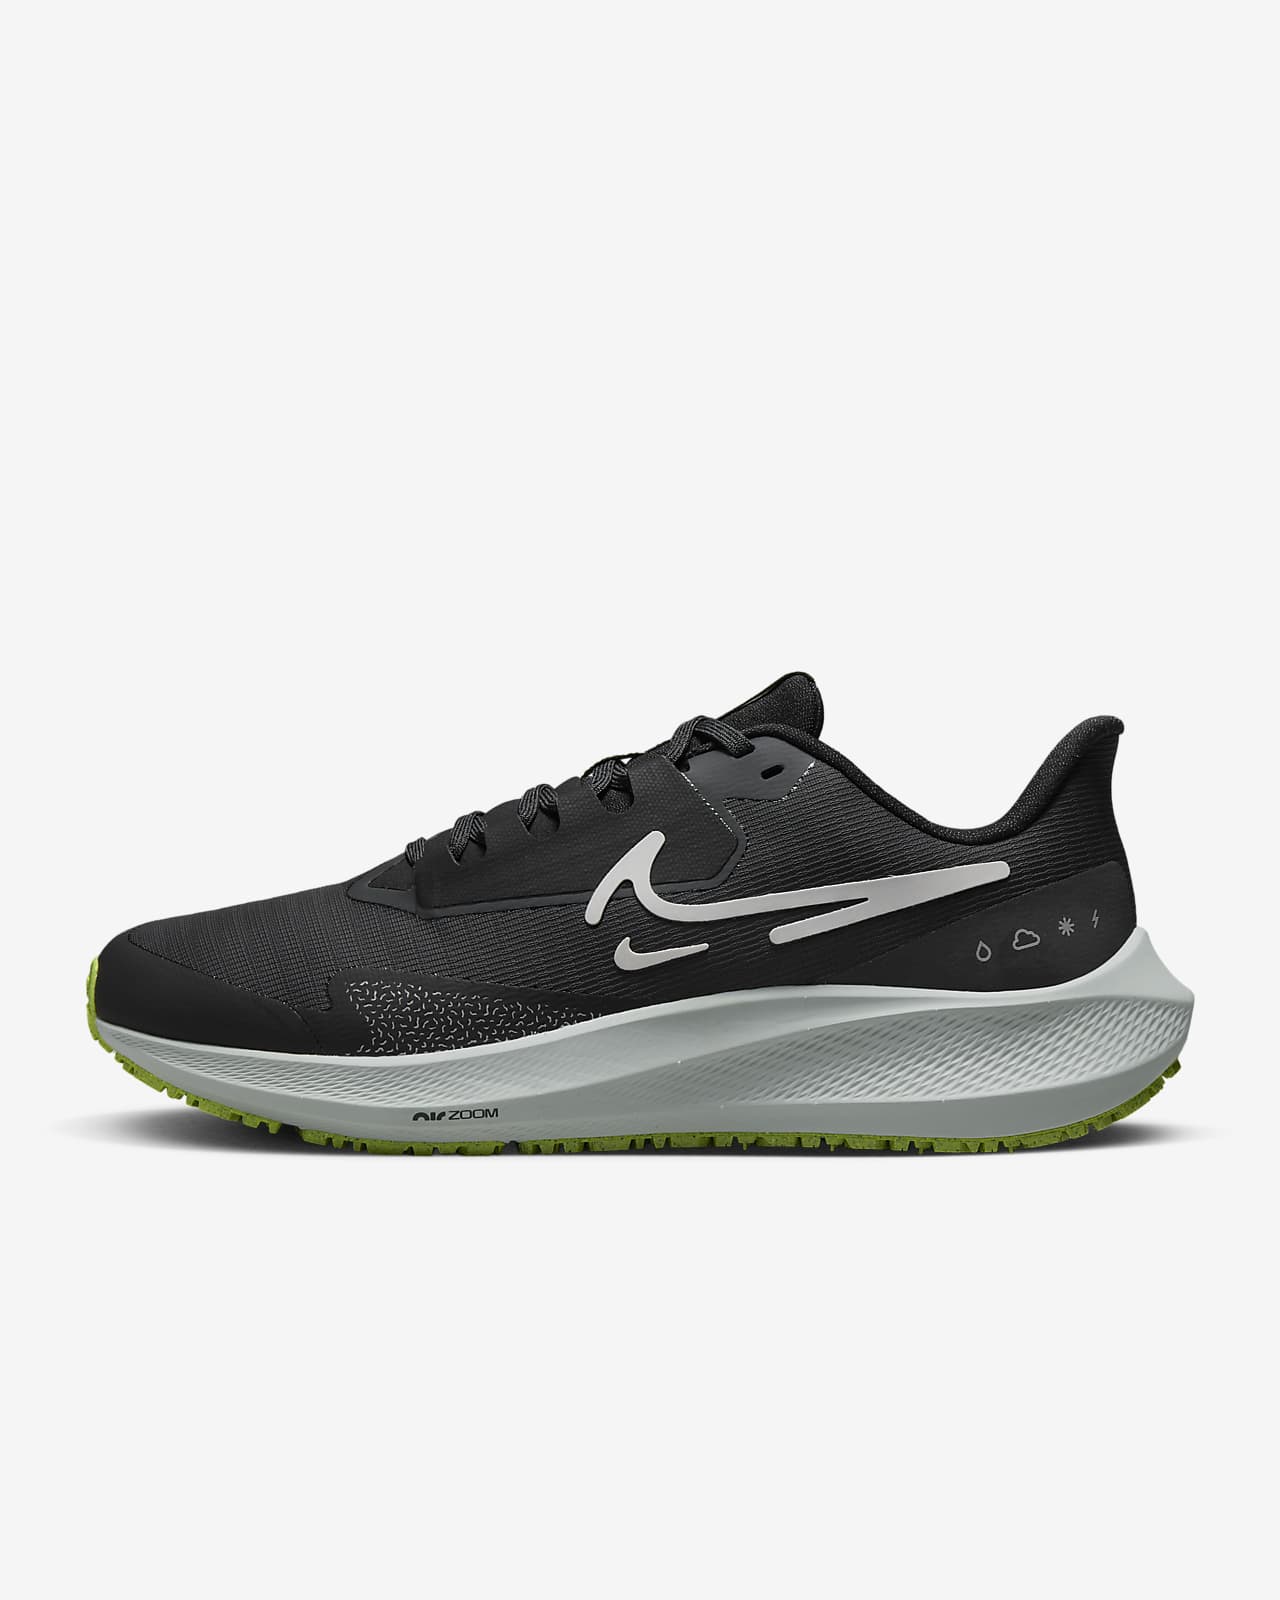 Share 161+ nike zoom shoes 2016 super hot